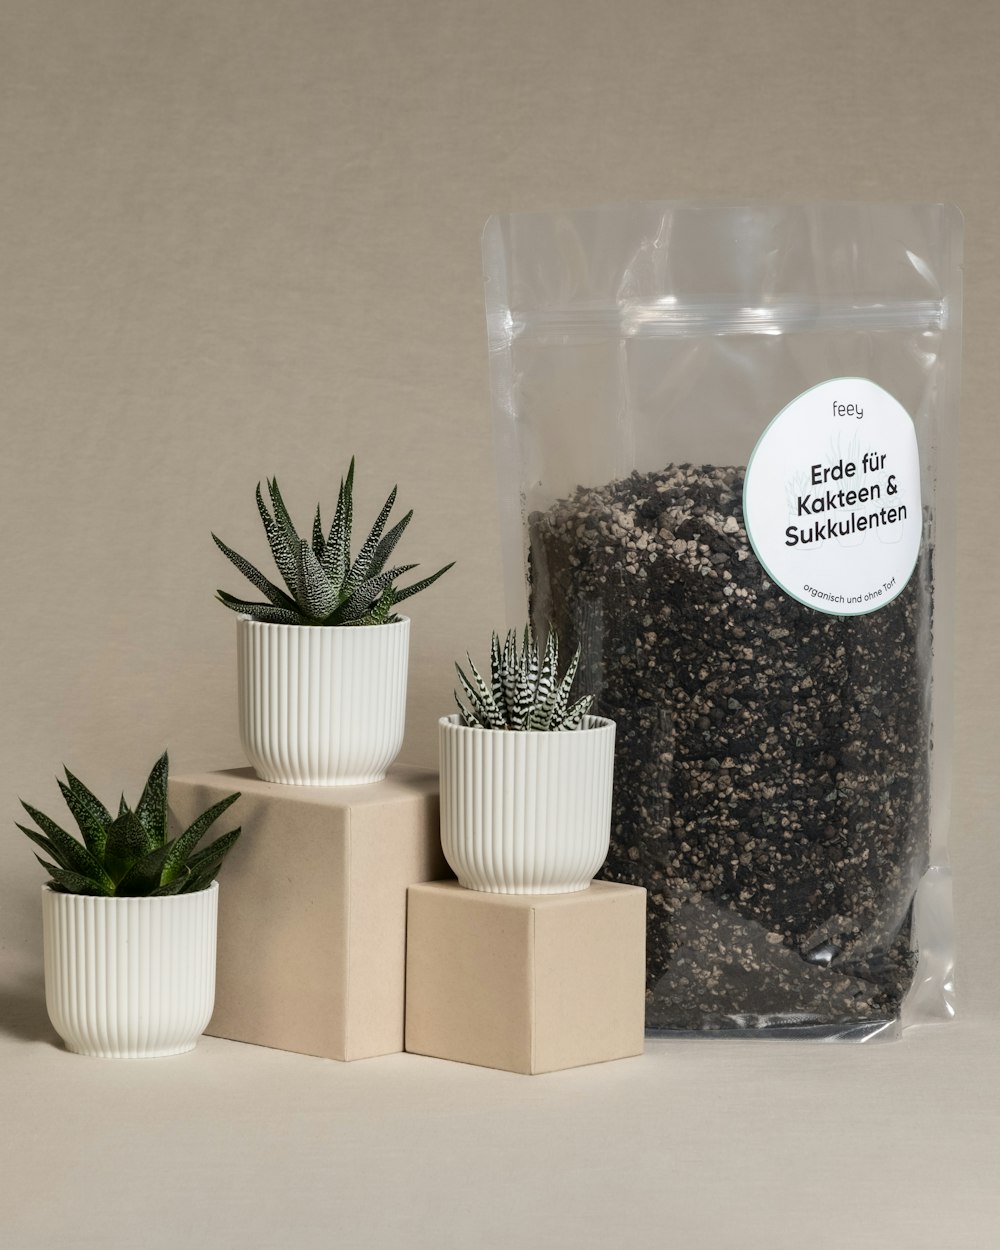 a bag of black seed next to three potted plants